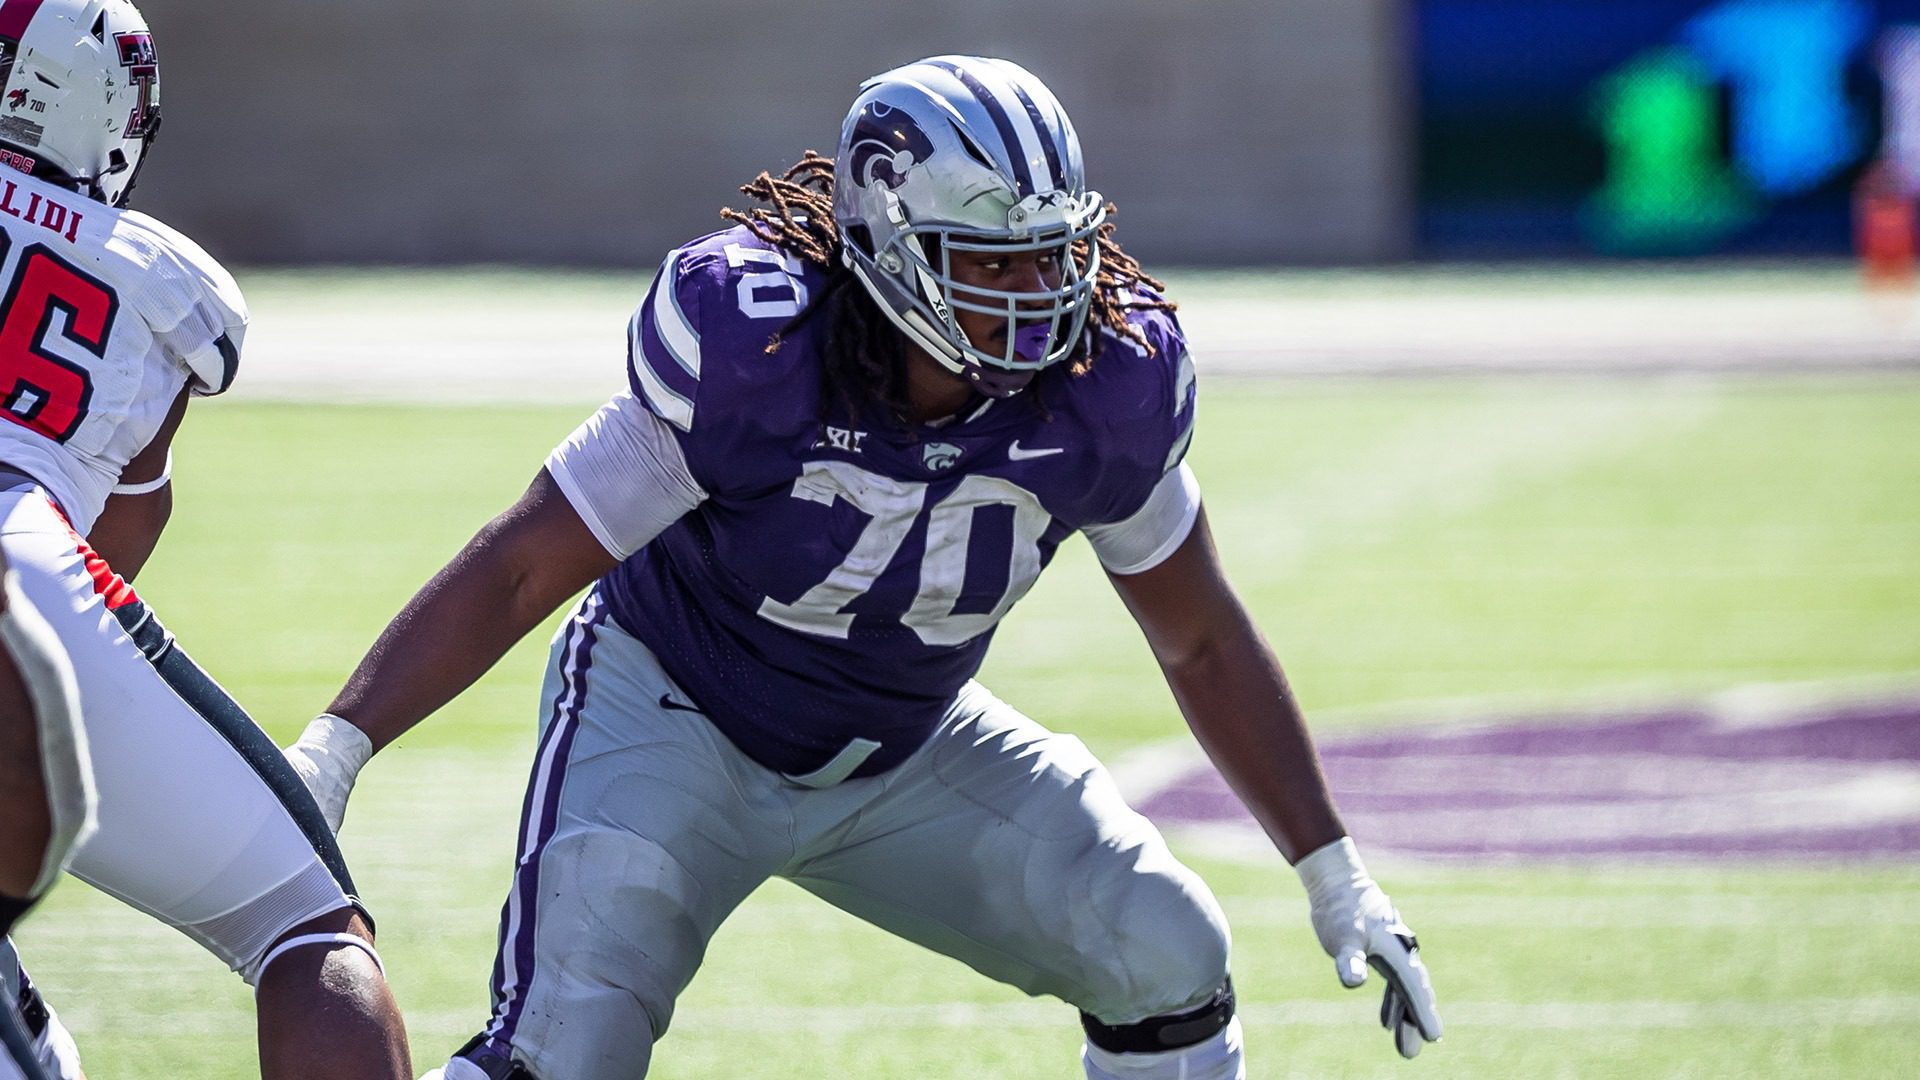 KT Leveston is a big bruising blocker on Kansas State's offensive line. Hula Bowl scout Brandon Harston breaks down Leveston as an NFL Prospect in his report.